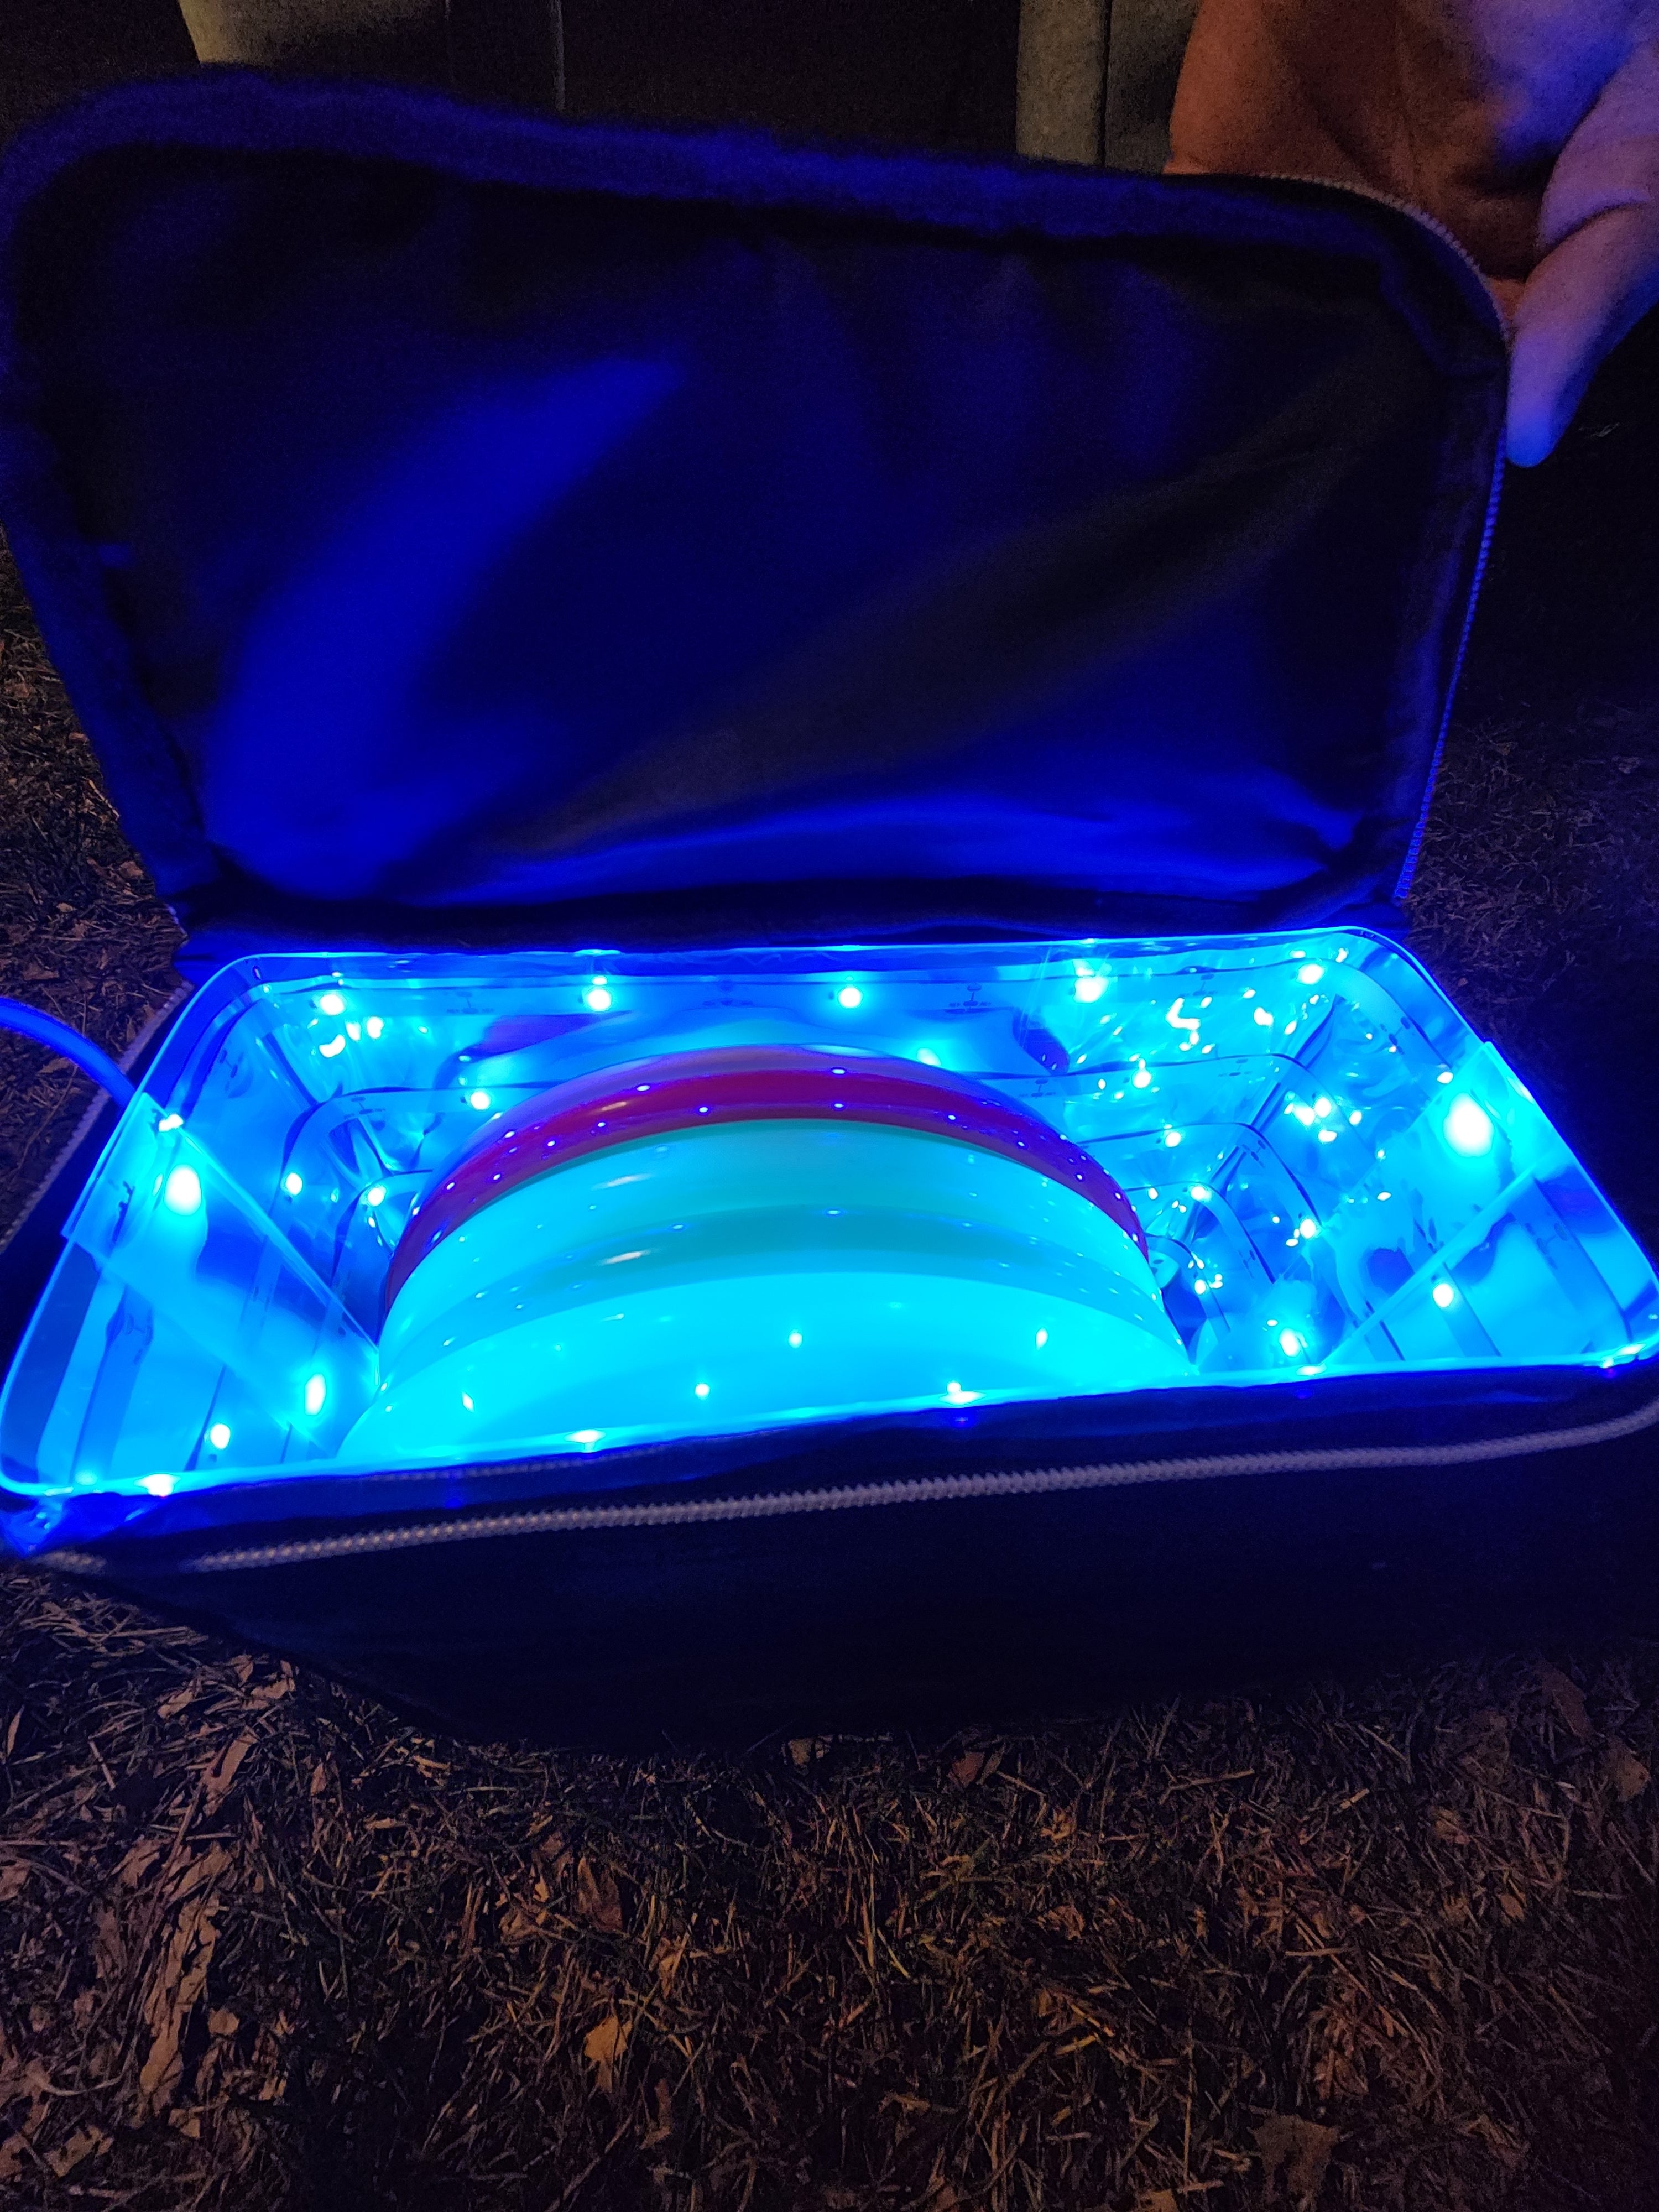 FABRIKK bags light up when open to help you find what you need at night